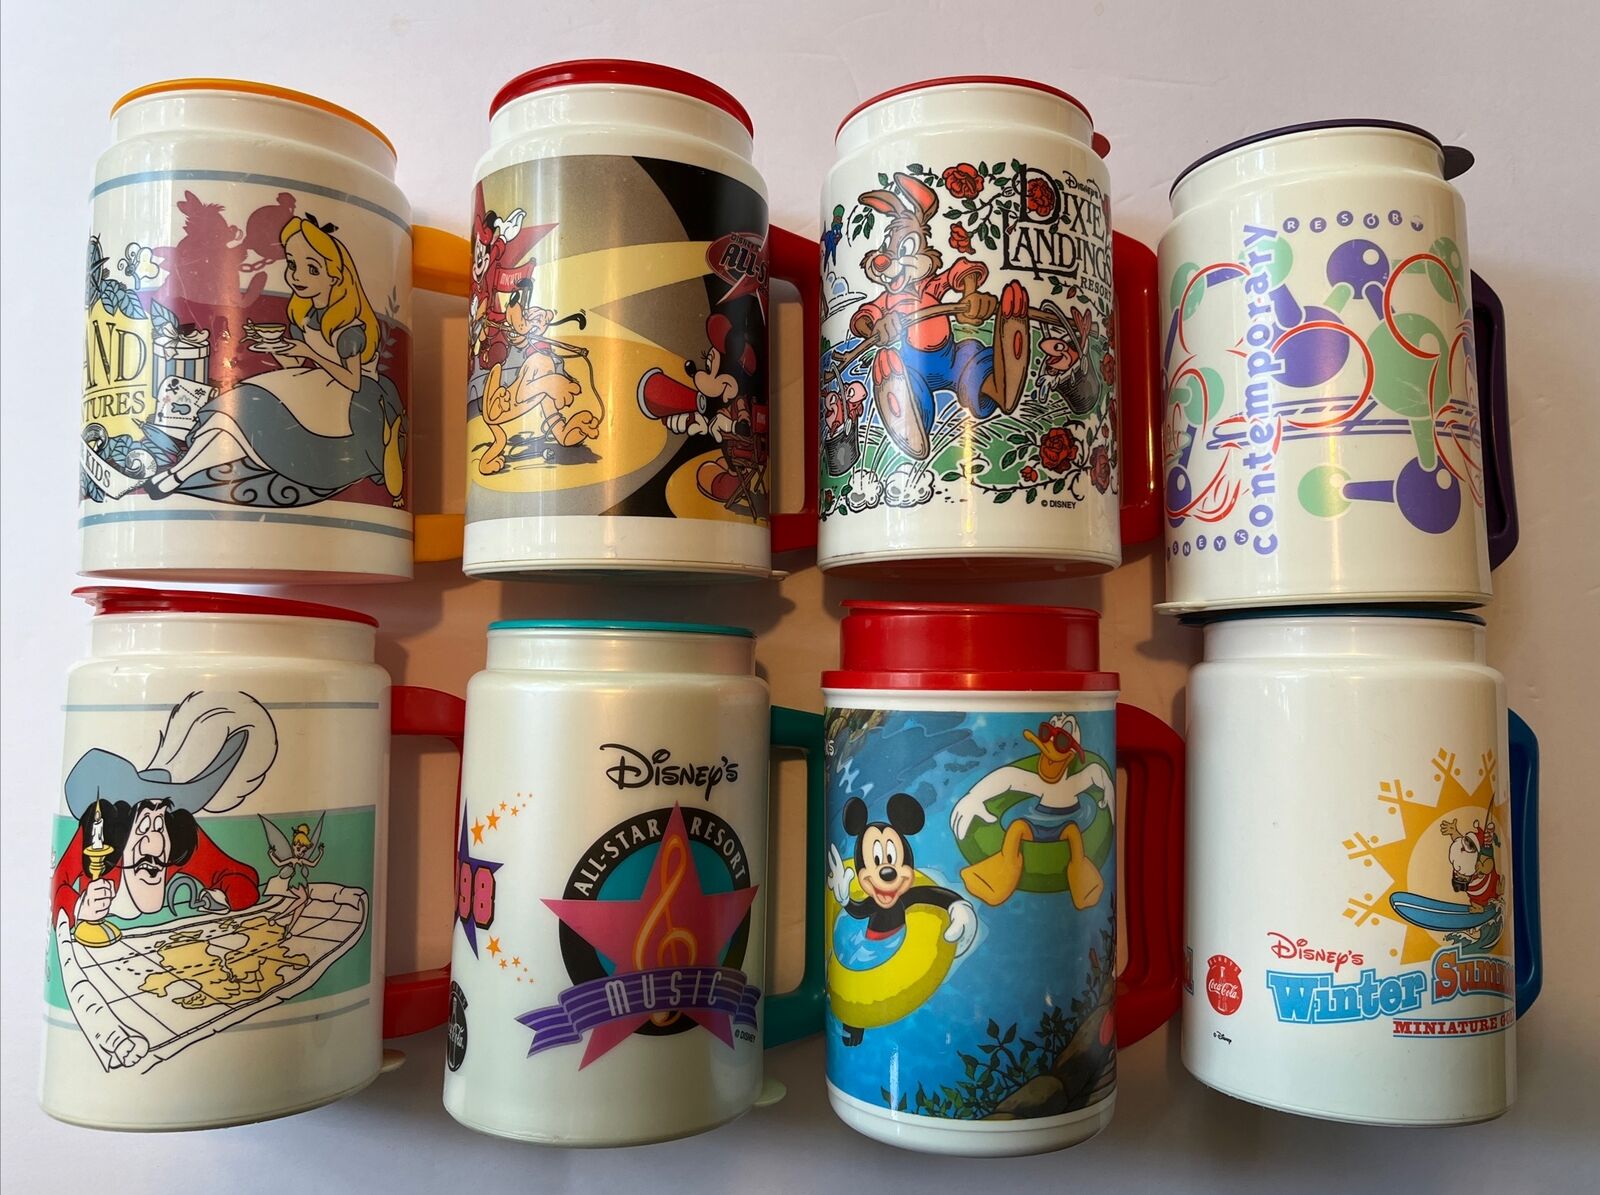 Lot of 8 Vintage Disney World Resort Refillable Mugs Insulated Cups w/ Lids WDW